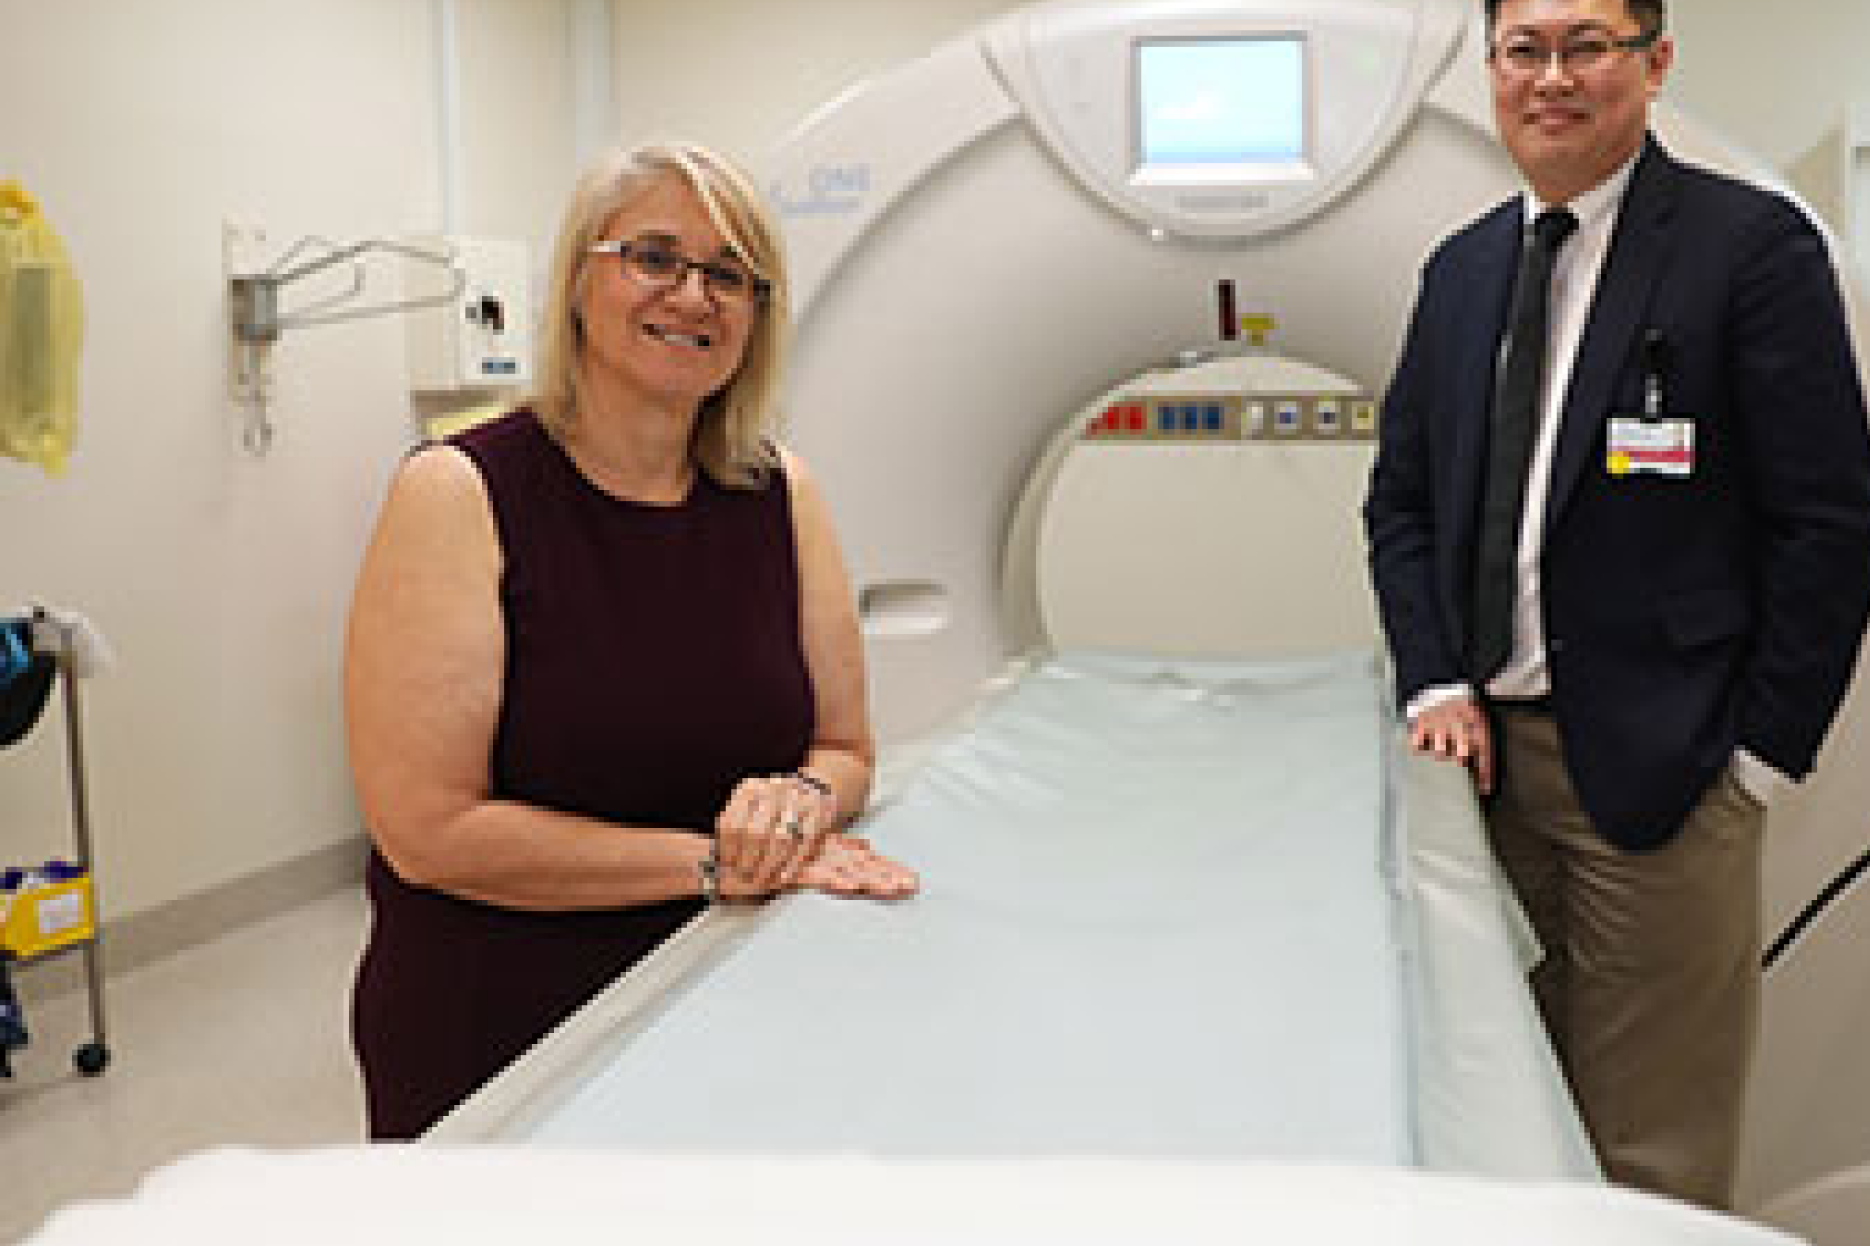 Vicki Fleming, Director ICT Enablement, Westmead Health Precinct, celebrates the launch of the new medical imaging platform with Auburn Hospital’s Director of Medical Services, Dr Chun Yee Tan